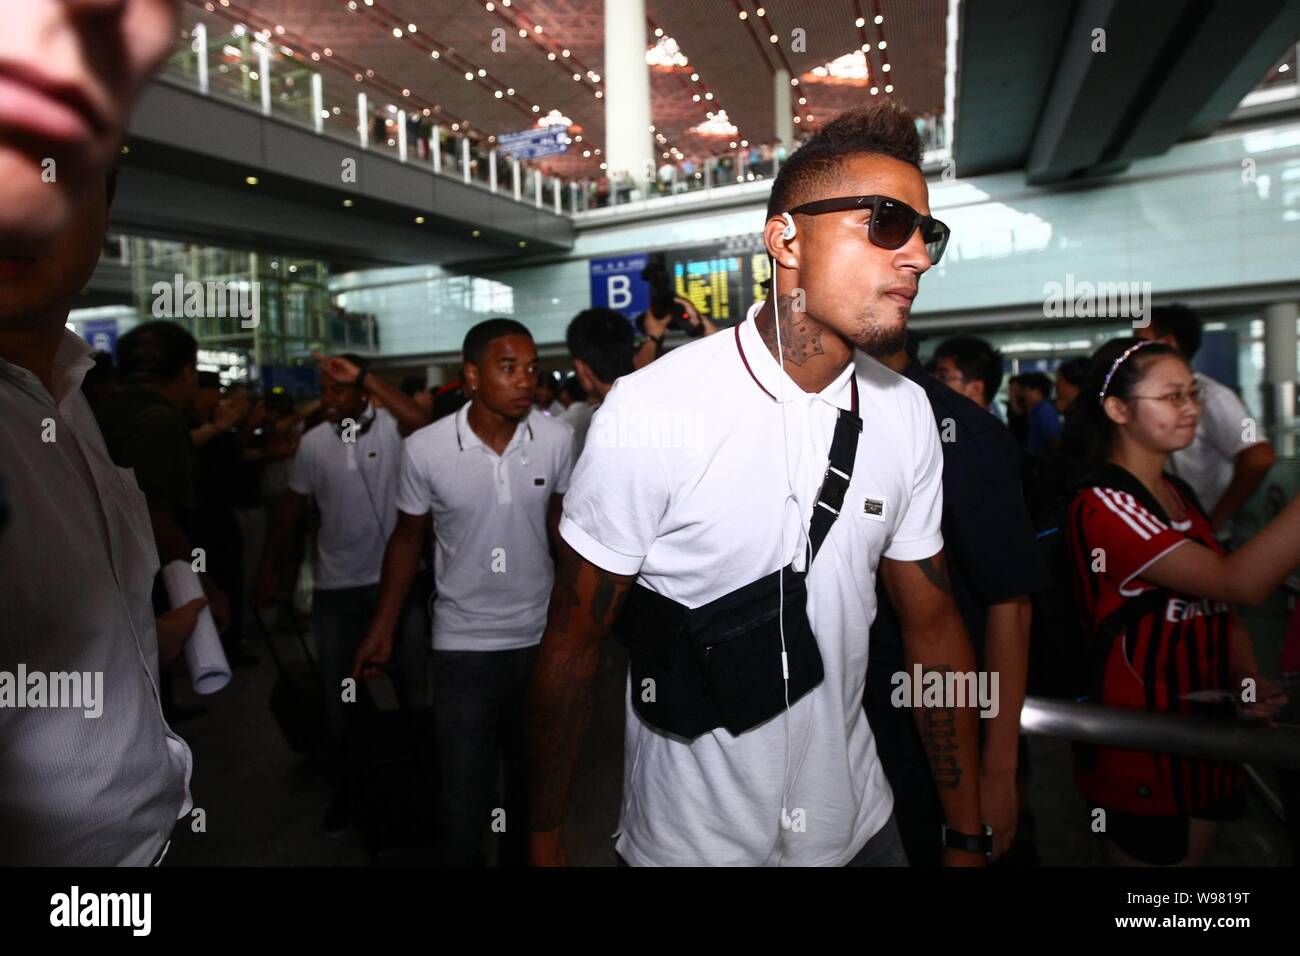 Kevin-Prince Boateng of AC Milan is pictured at Beijing Capital International Airport in Beijing, China, 2 August 2011.   Tuesday (2 August 2011) Ital Stock Photo